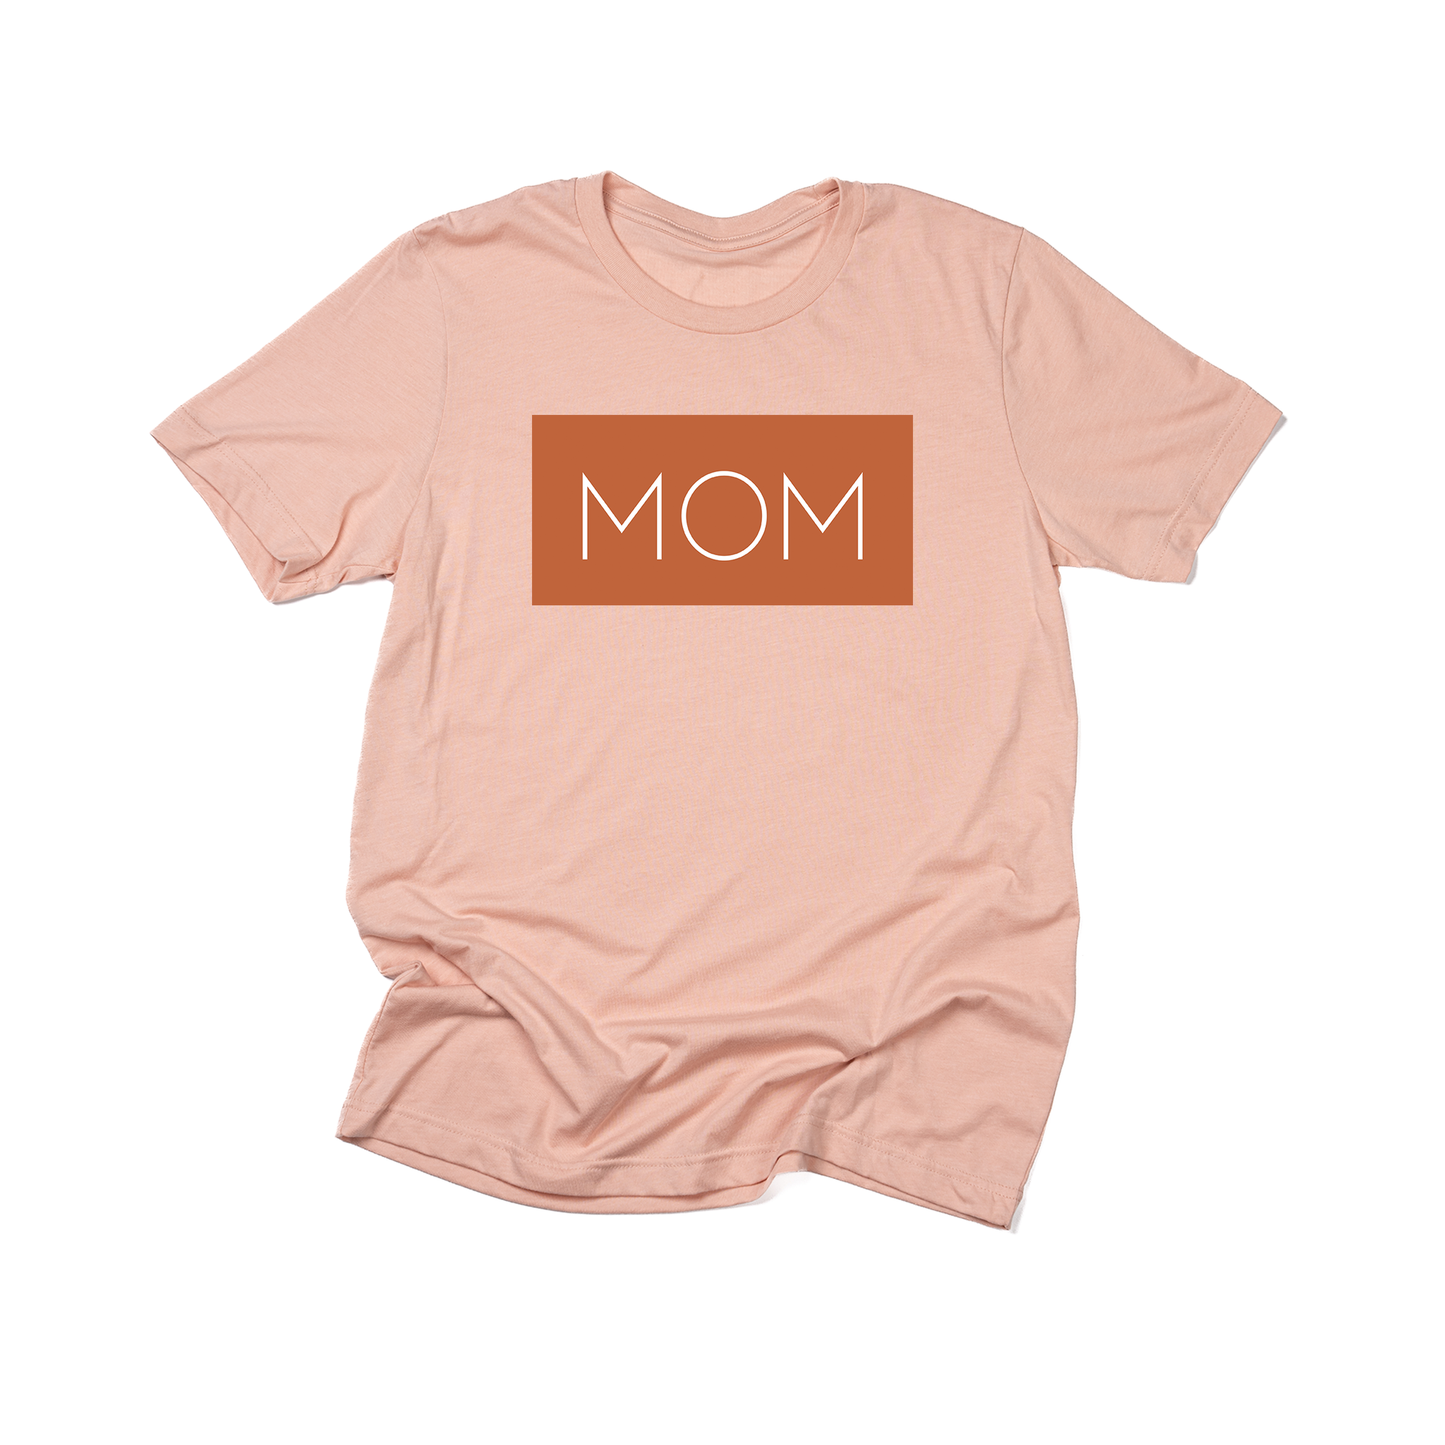 Mom (Boxed Collection, Rust Box/White Text, Across Front) - Tee (Peach)